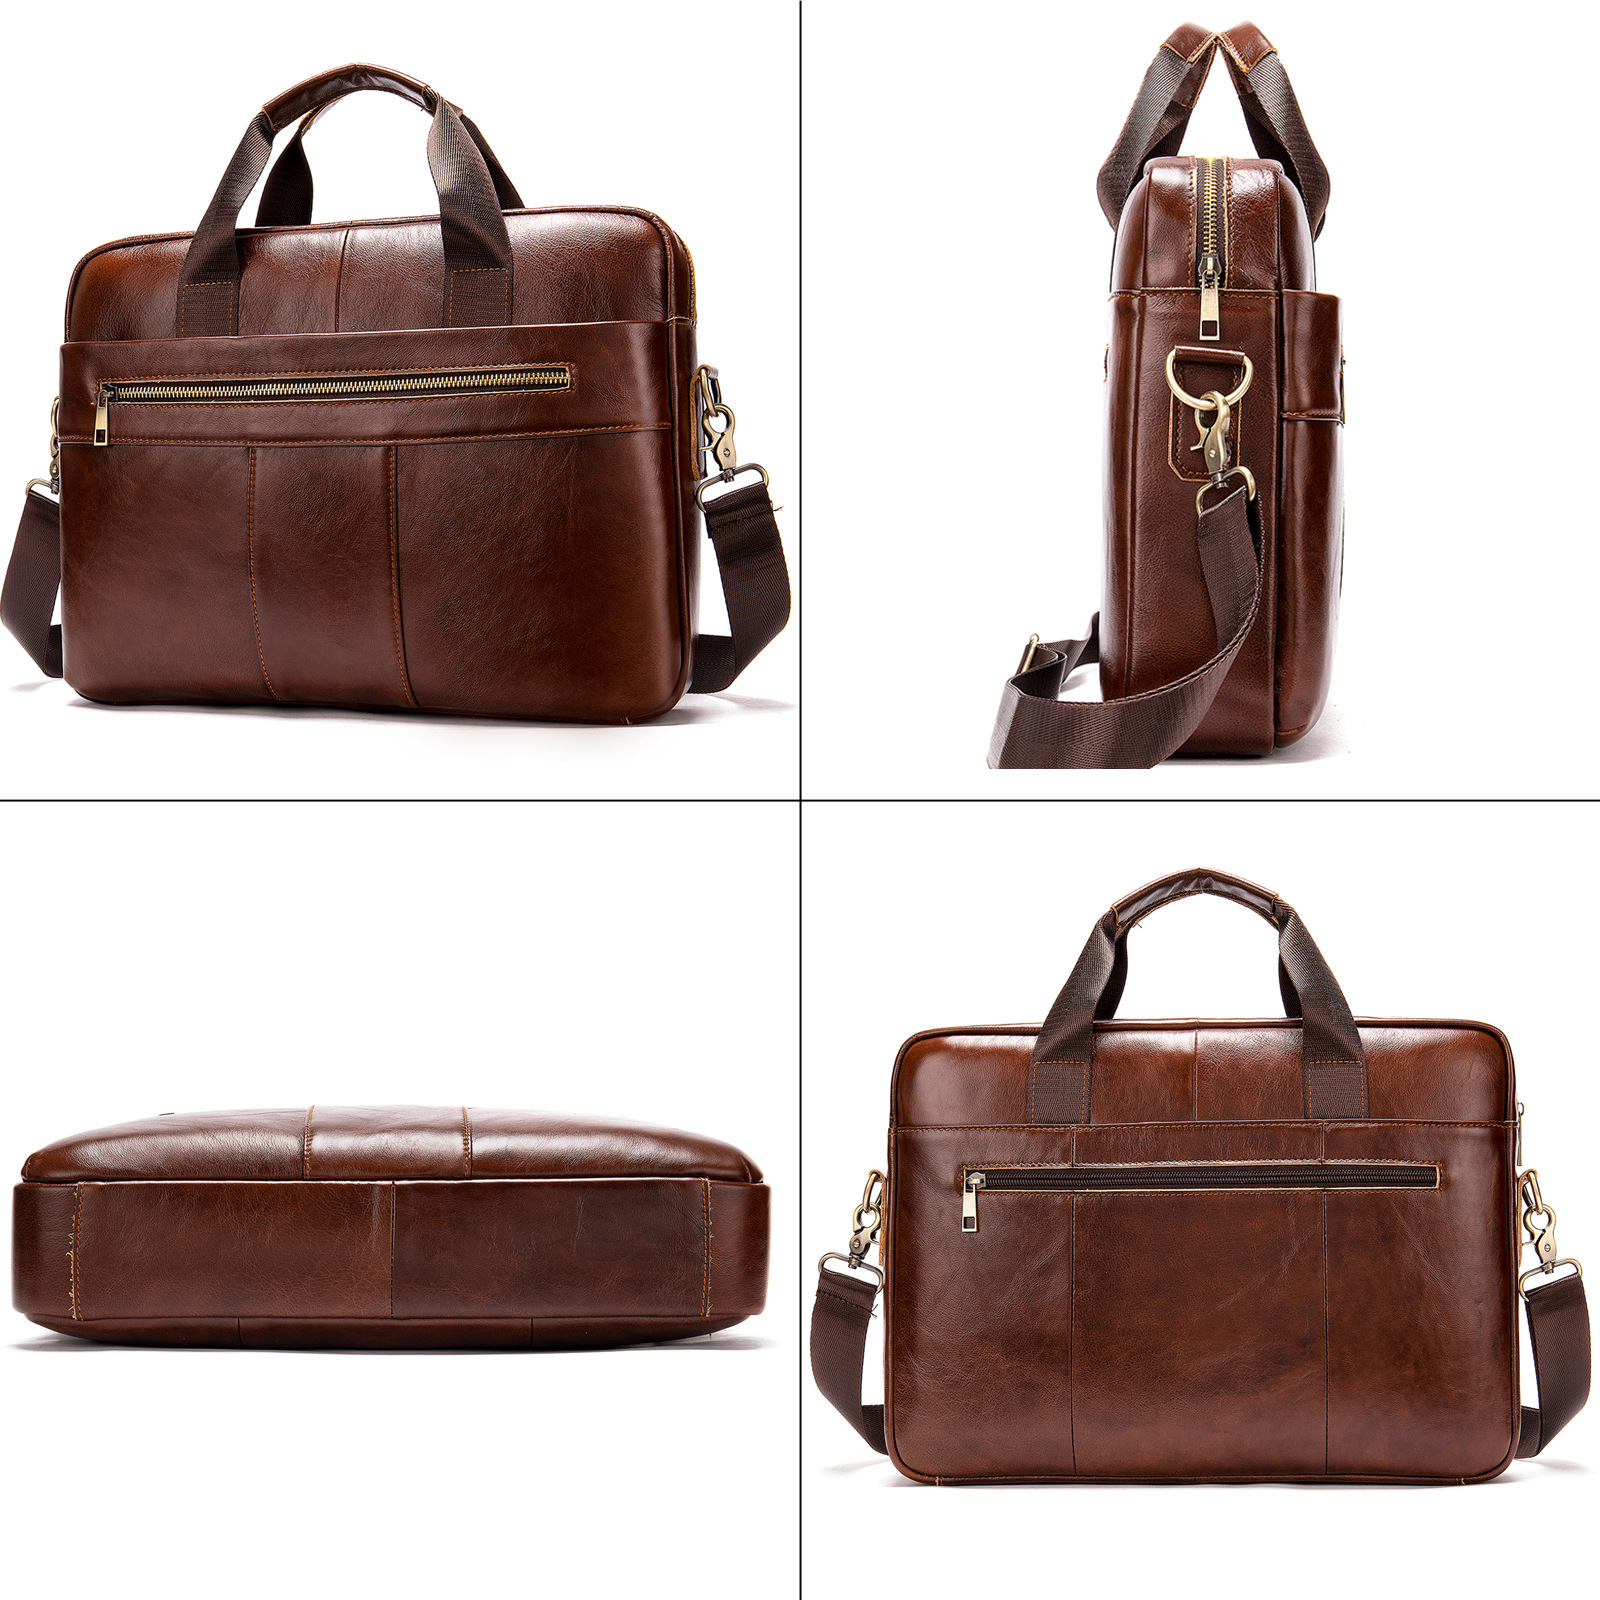 leather briefcase for men

